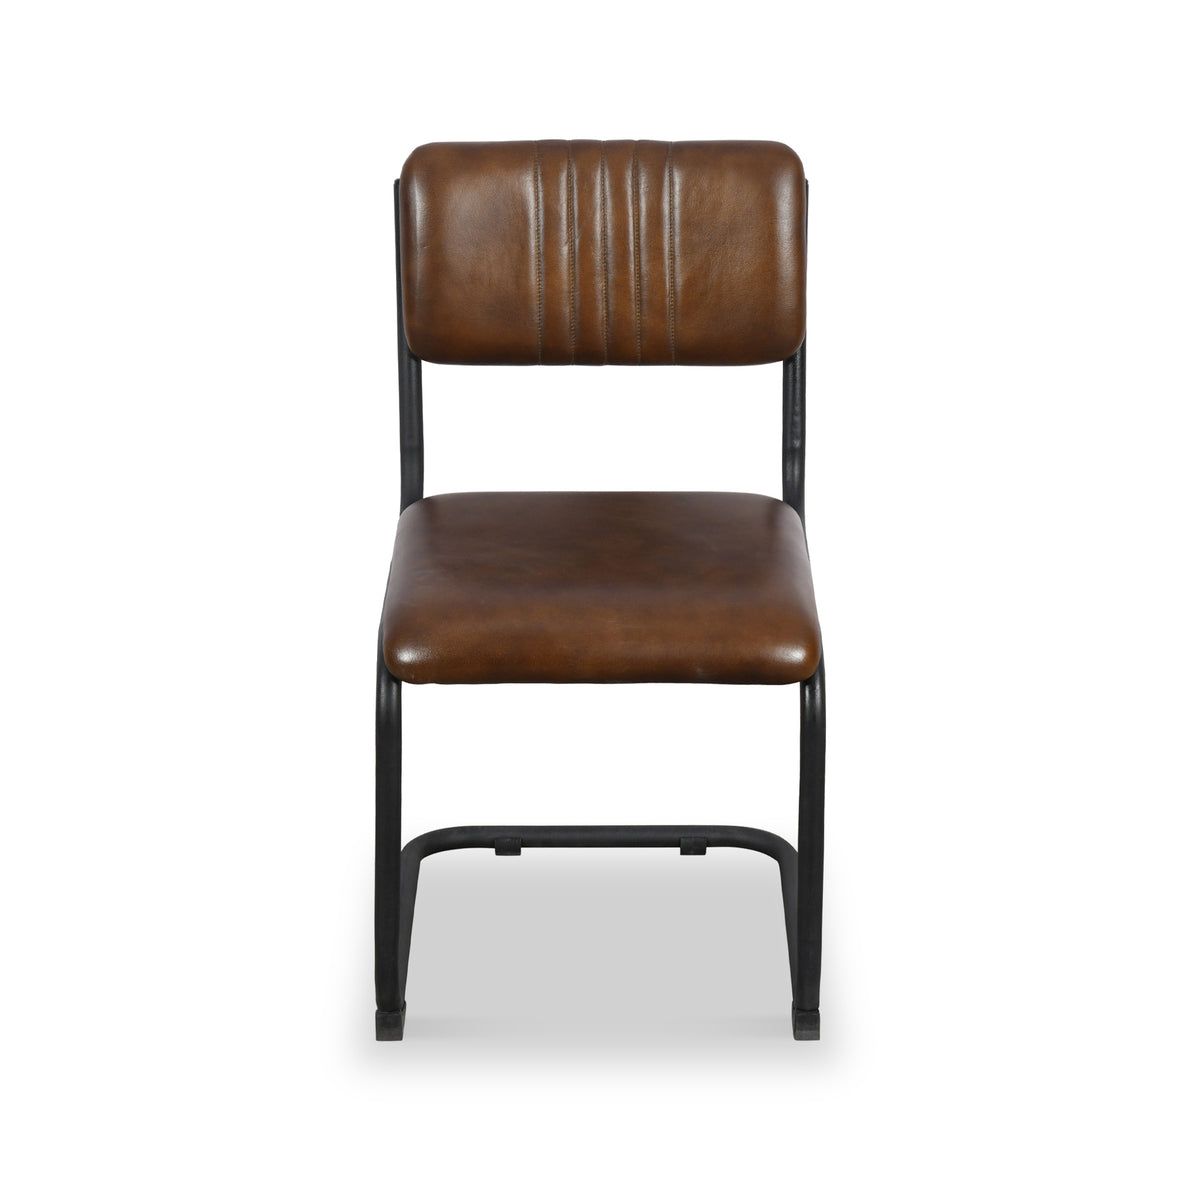 Curran Brown Buffalo Leather Dining Chair from Roseland Furniture